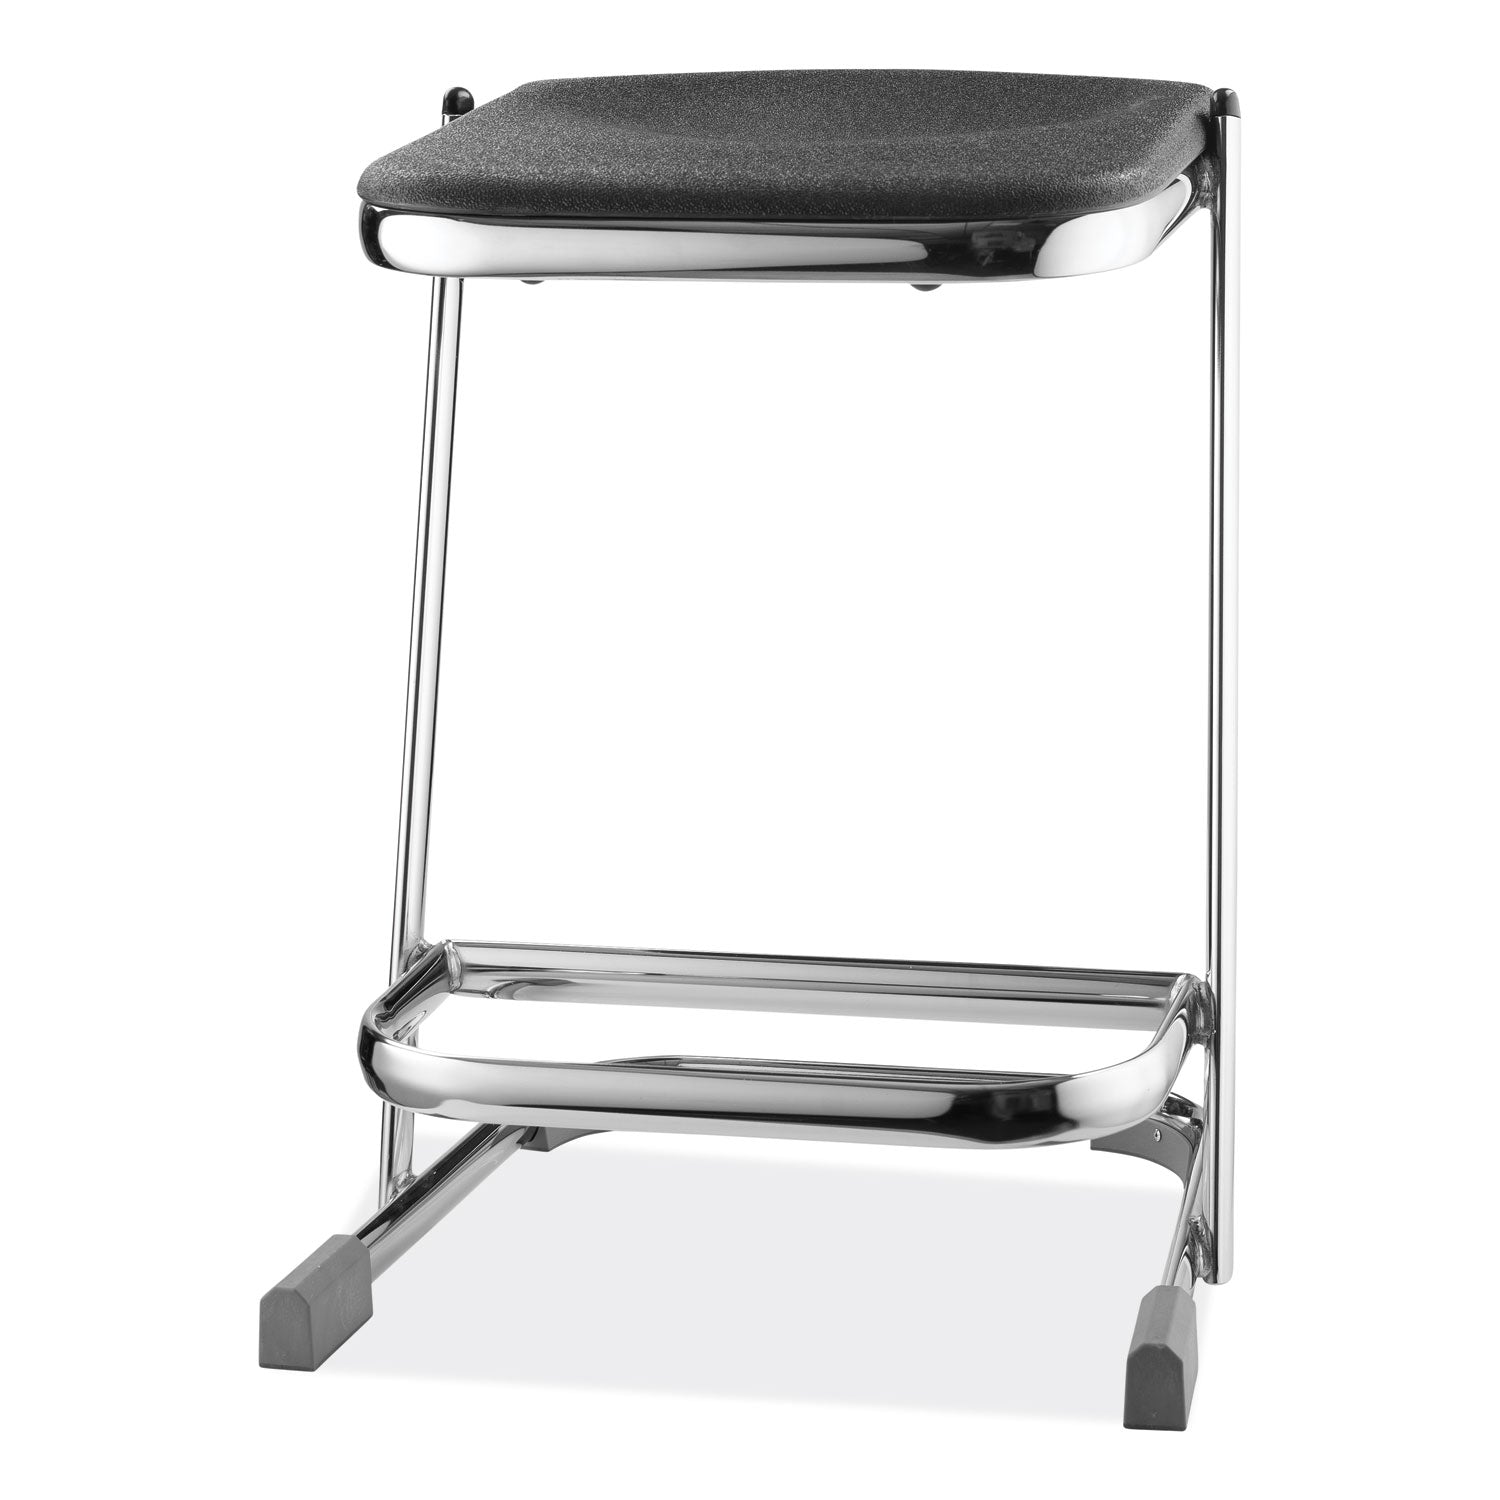 6600-series-elephant-z-stool-backless-supports-up-to-500lb-22-seat-height-black-seat-chrome-frameships-in-1-3-bus-days_nps6622 - 4